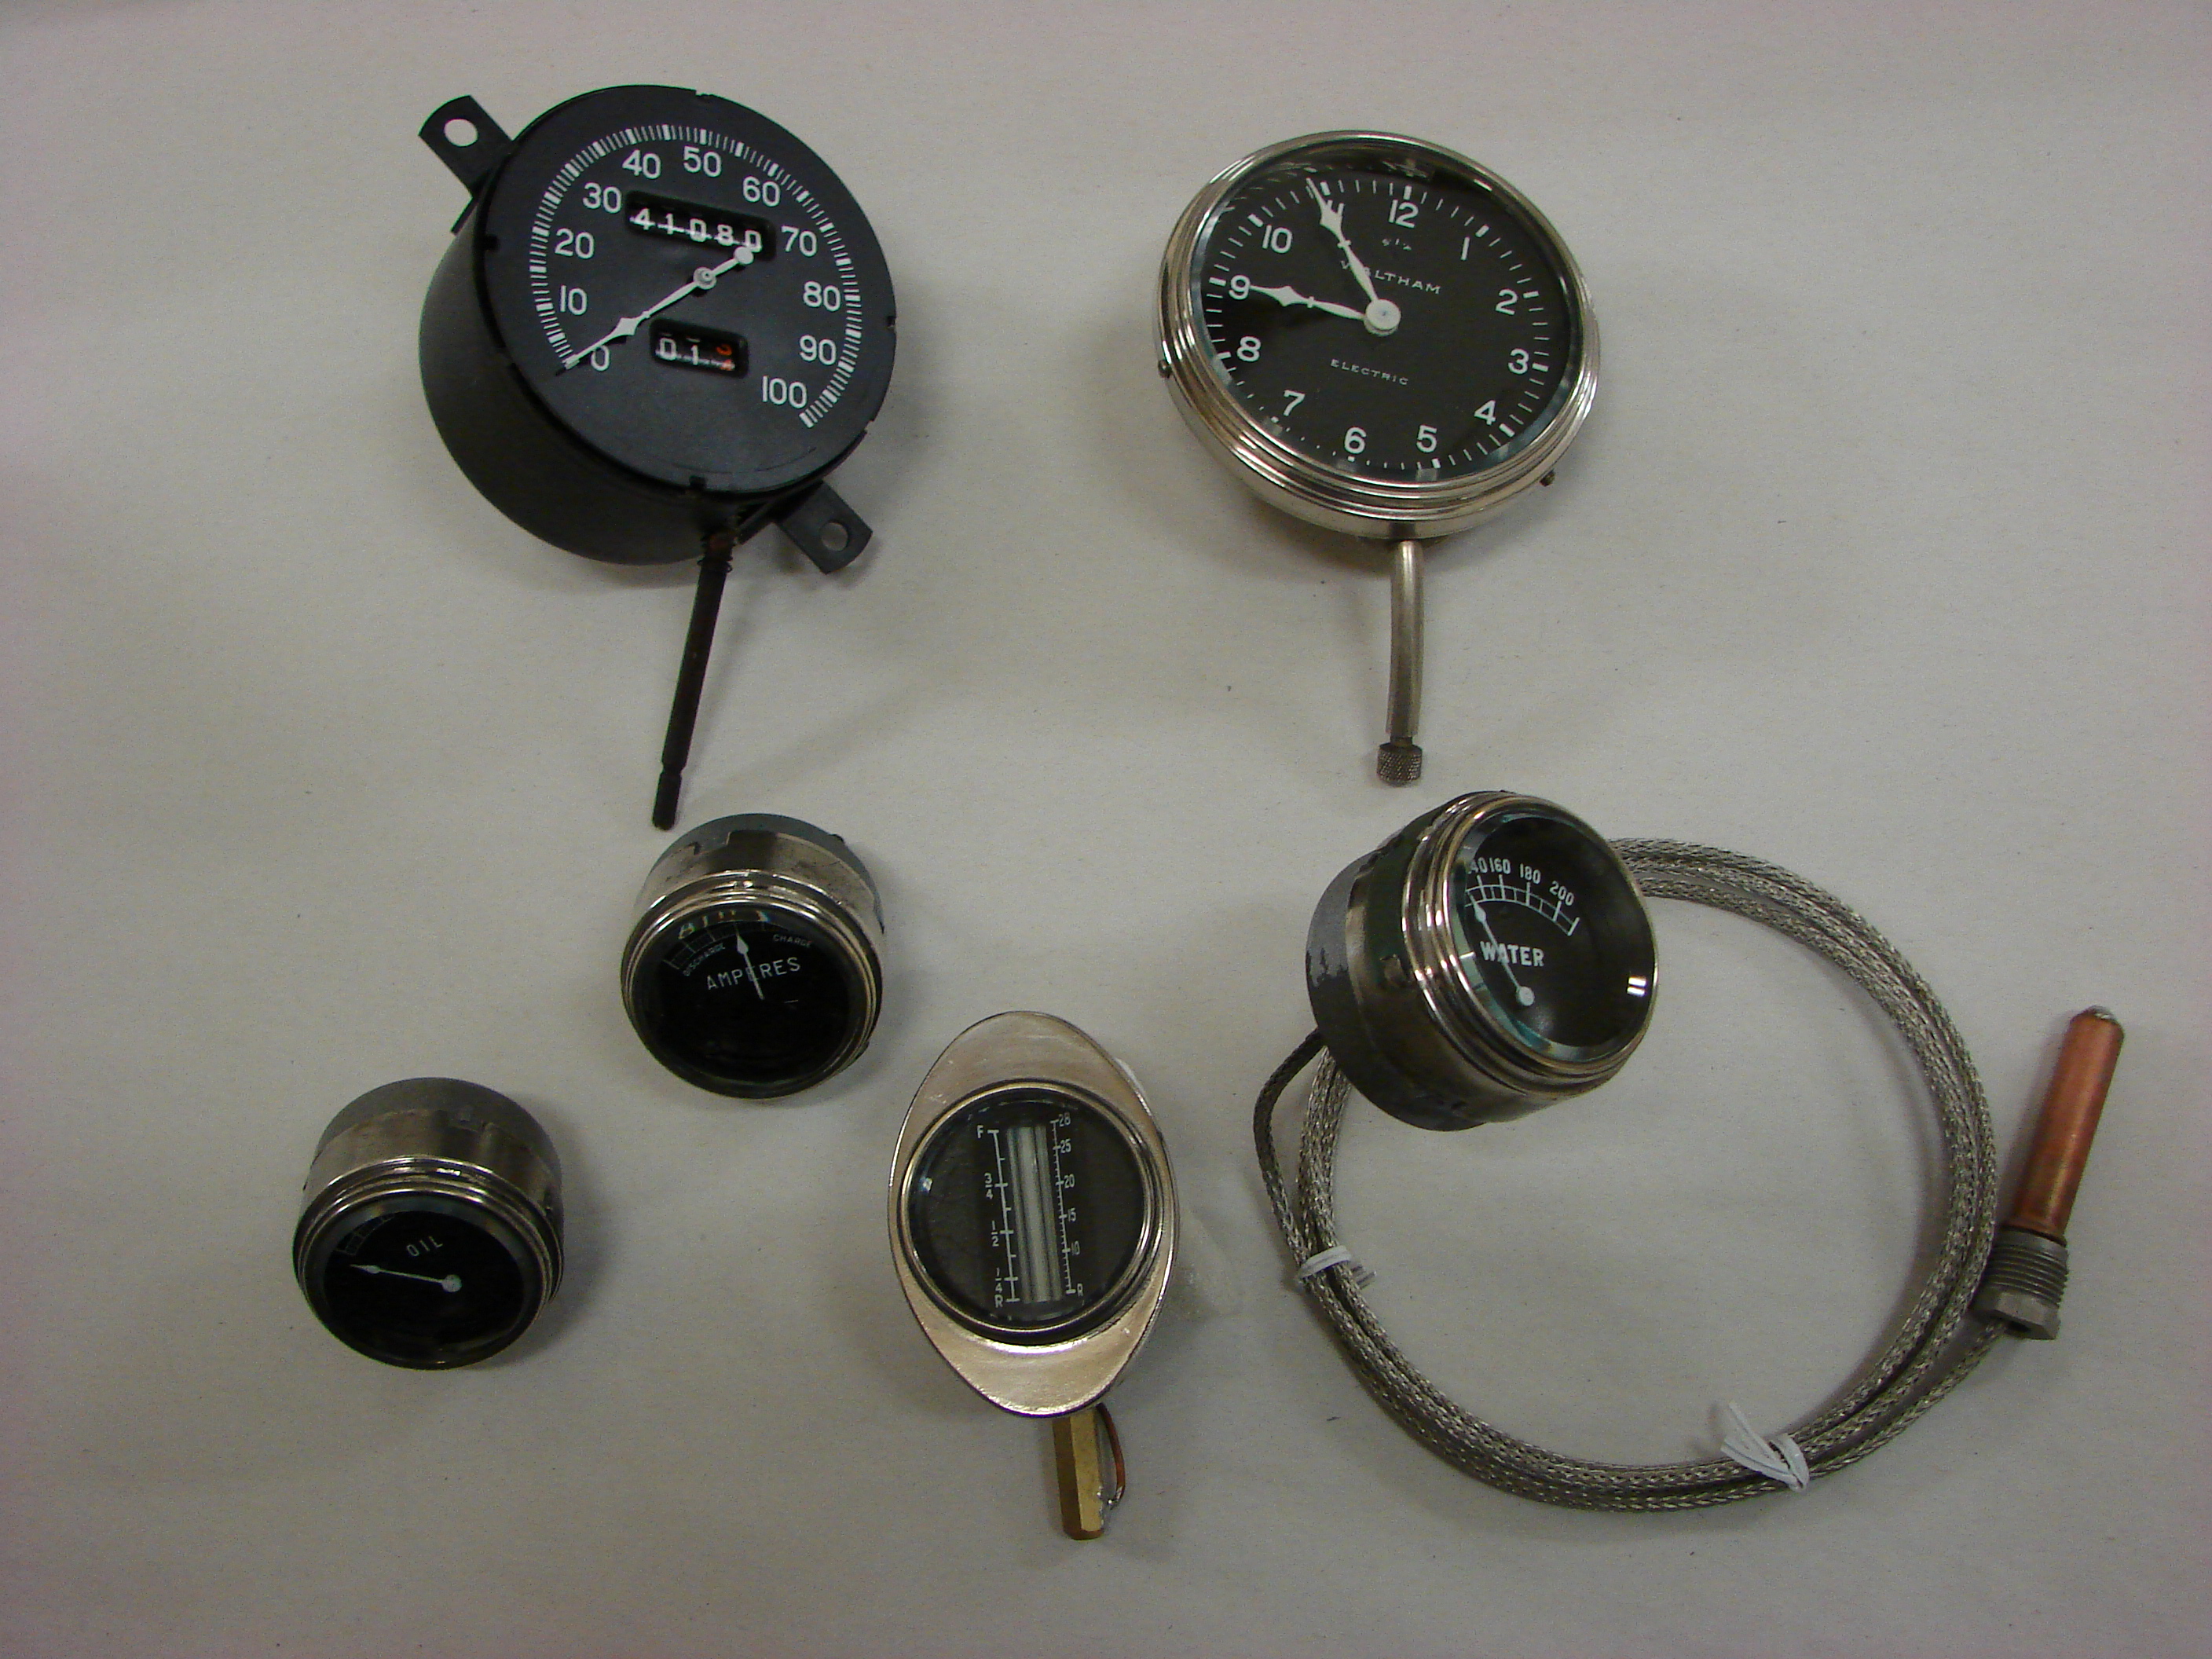 Speedometers for a vehicle